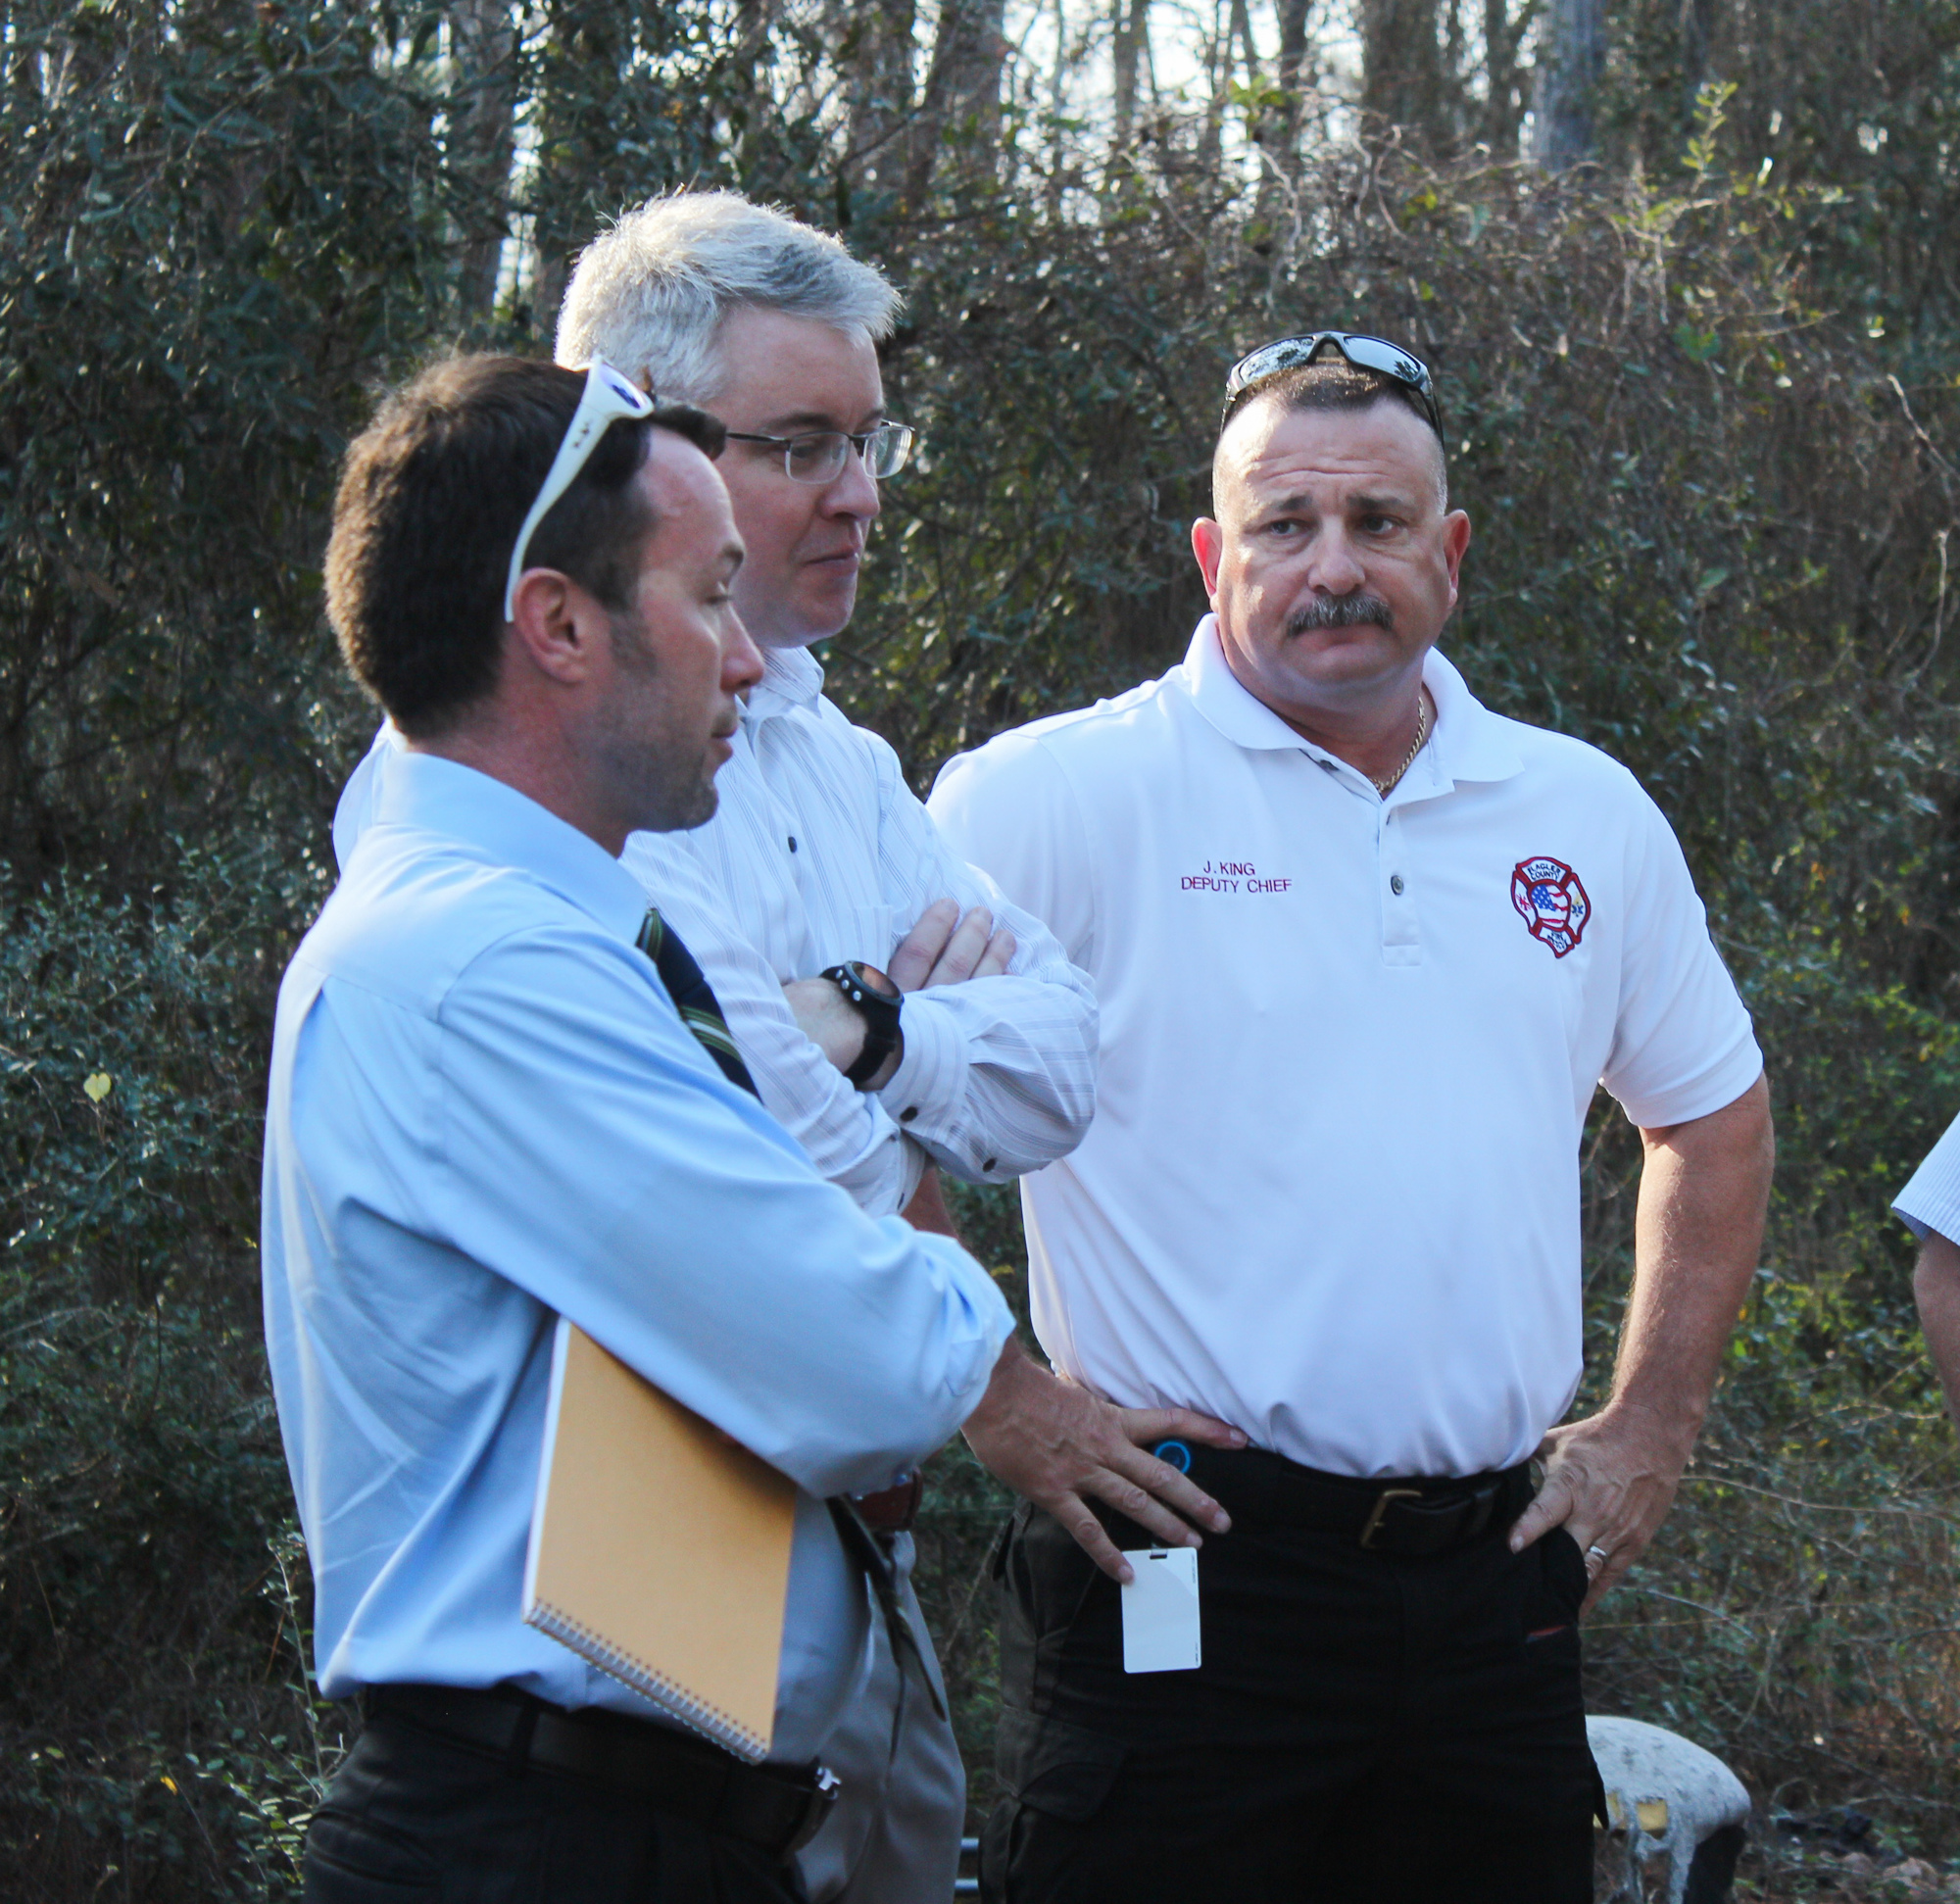 Assistant County Attorney Sean Moylan, Public Lands and Natural Resources Manager Tim Telfer and Flagler County Fire Rescue Deputy Chief Joe King discuss their observations on the homeless camp. Photo by Ray Boone